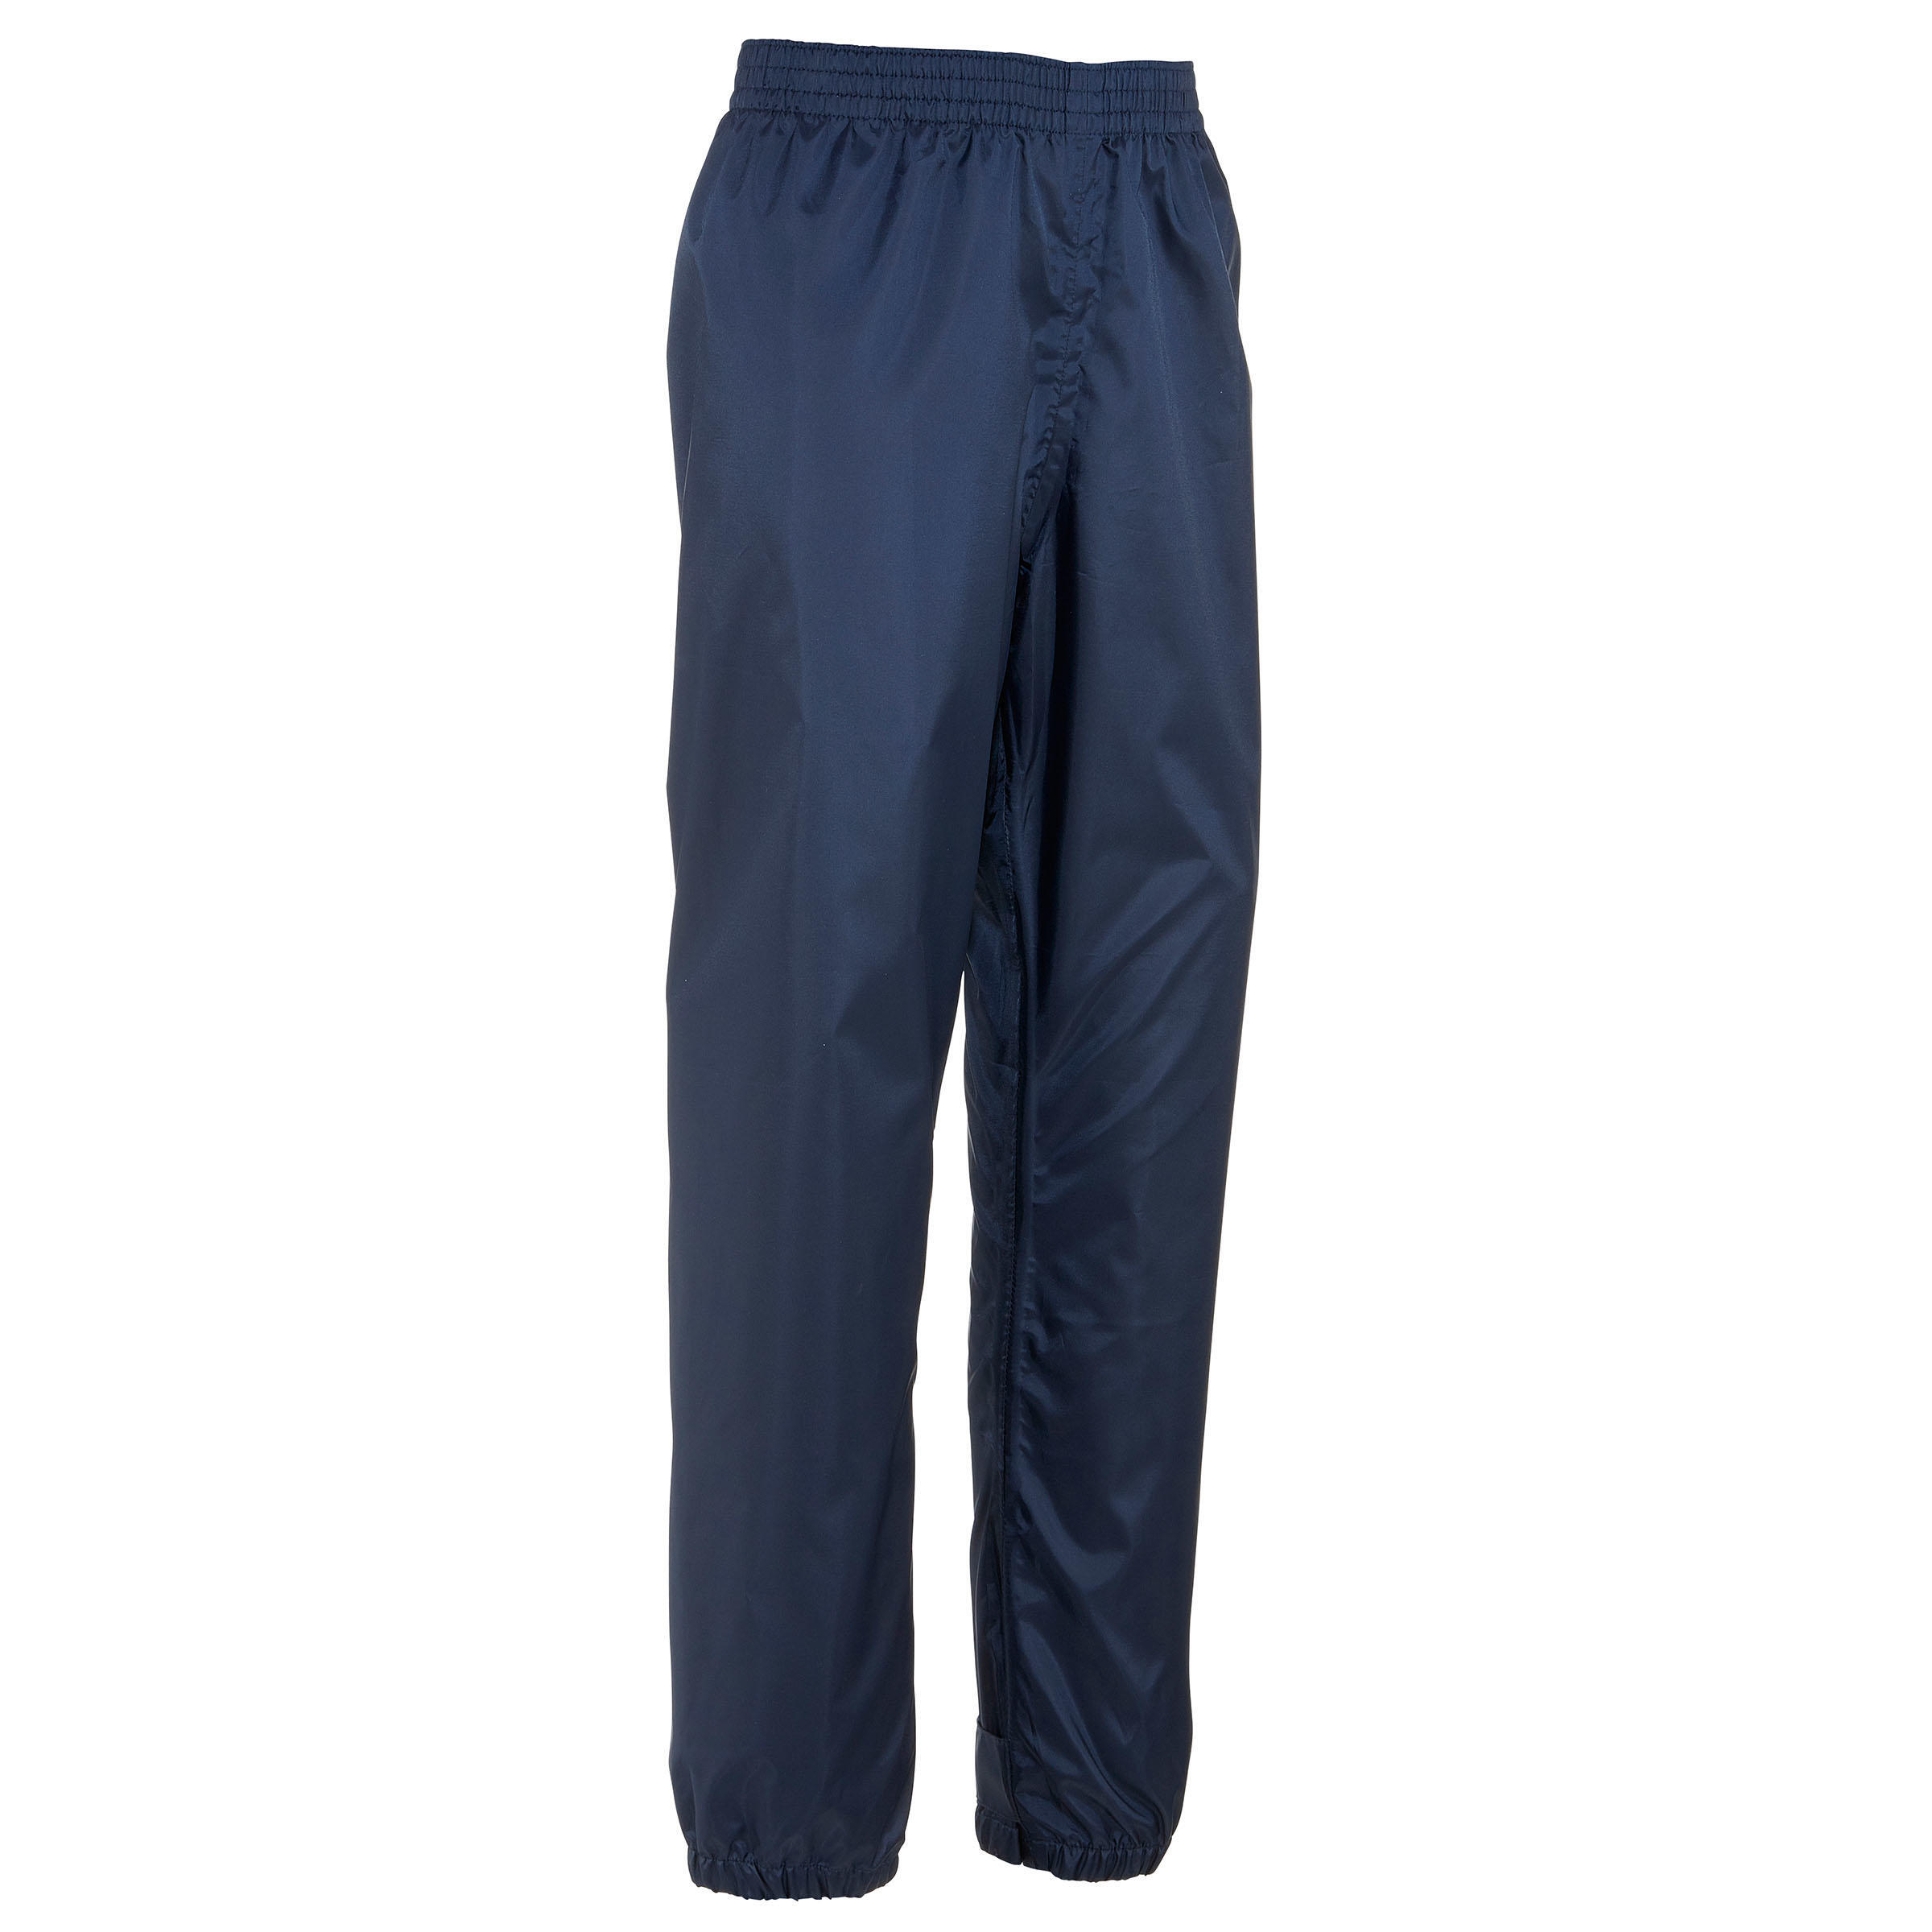 QUECHUA Kid's 7-15y waterproof trousers - MH100 - Navy Blue